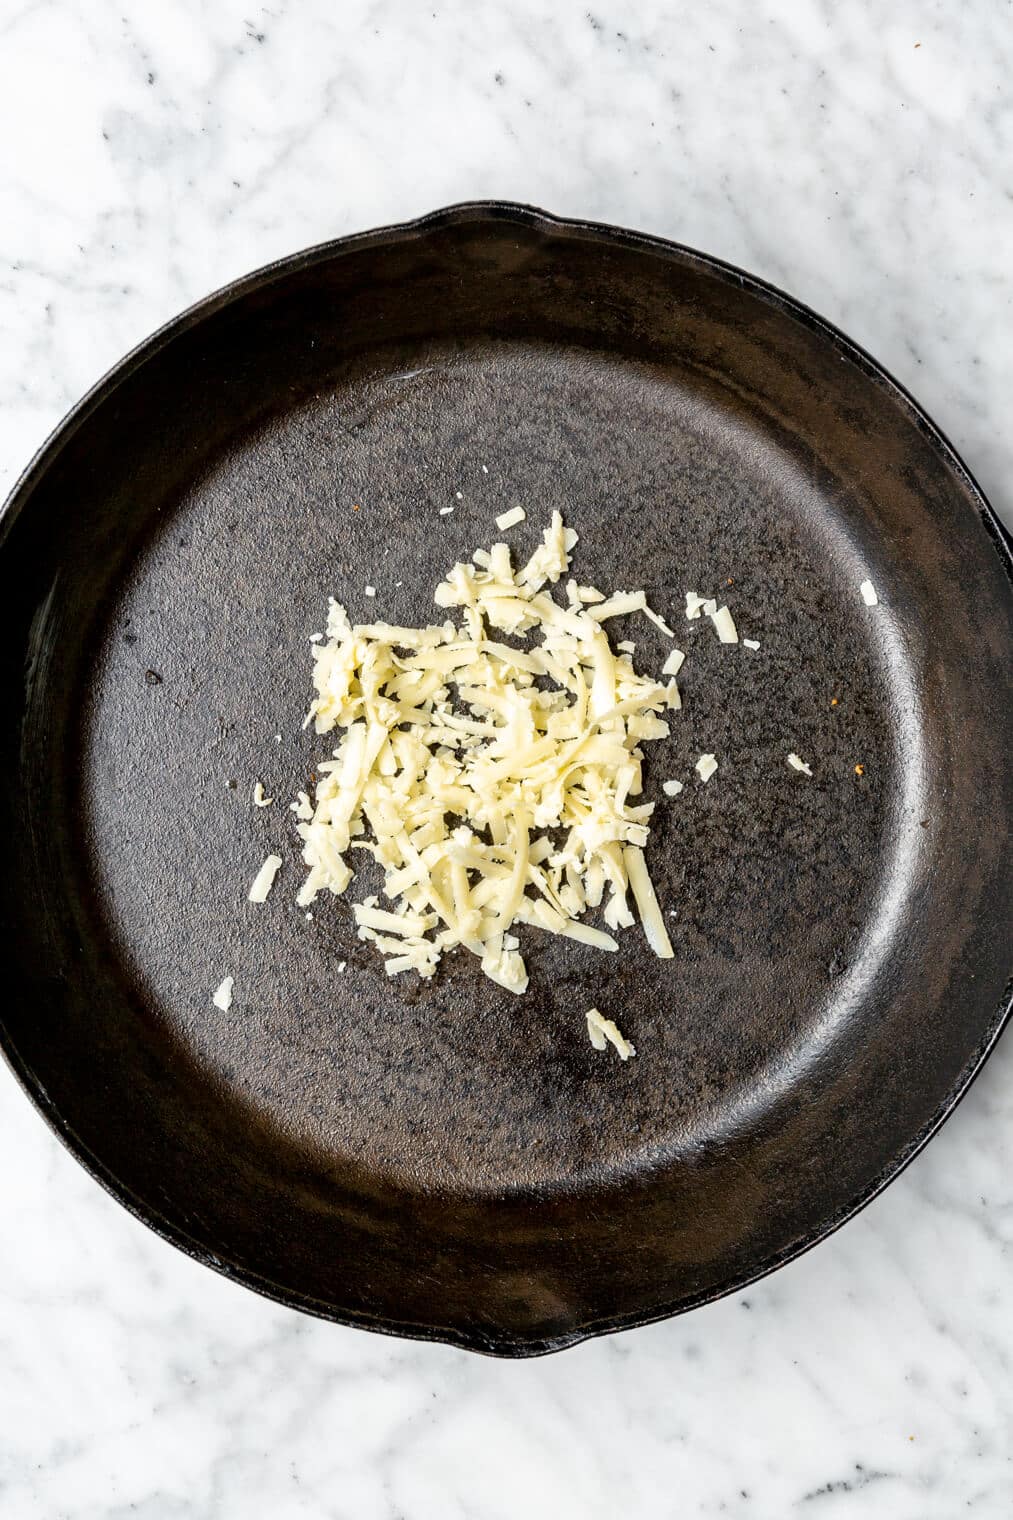 Shredded cheese sprinkled in a black, cast iron pan.